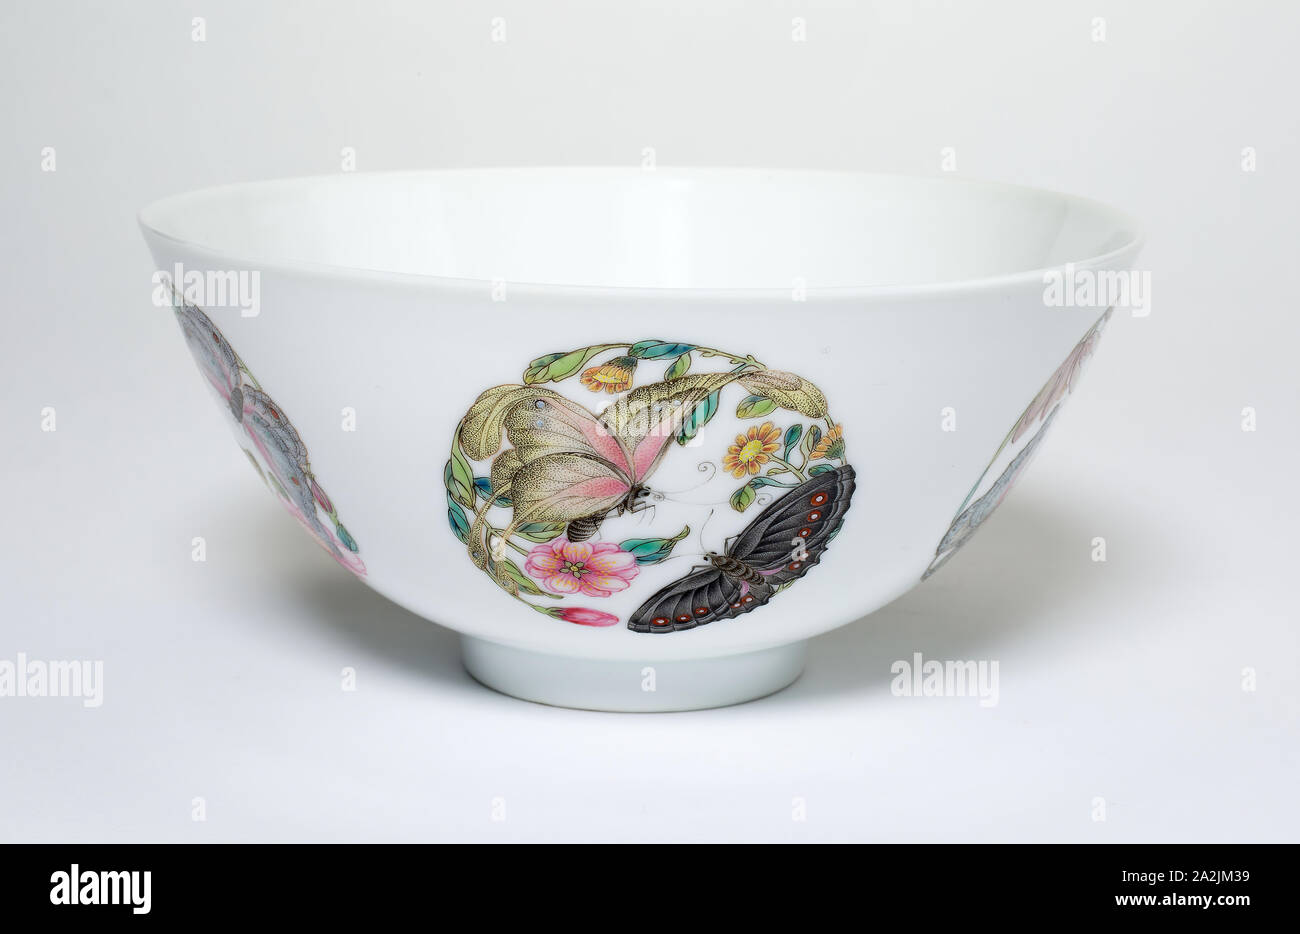 Bowl with Medallions of Butterflies, Peonies, Chrysanthemums, Peaches, Plums and Orchids, Qing dynasty (1644–1911), spurious reign mark of Yongzheng (1723–35), overglaze painting perhaps added later, China, Porcelain painted in overglaze famille rose enamels, H. 6.7 cm (2 5/8 in.), diam. 14.4 cm (5 11/16 in Stock Photo